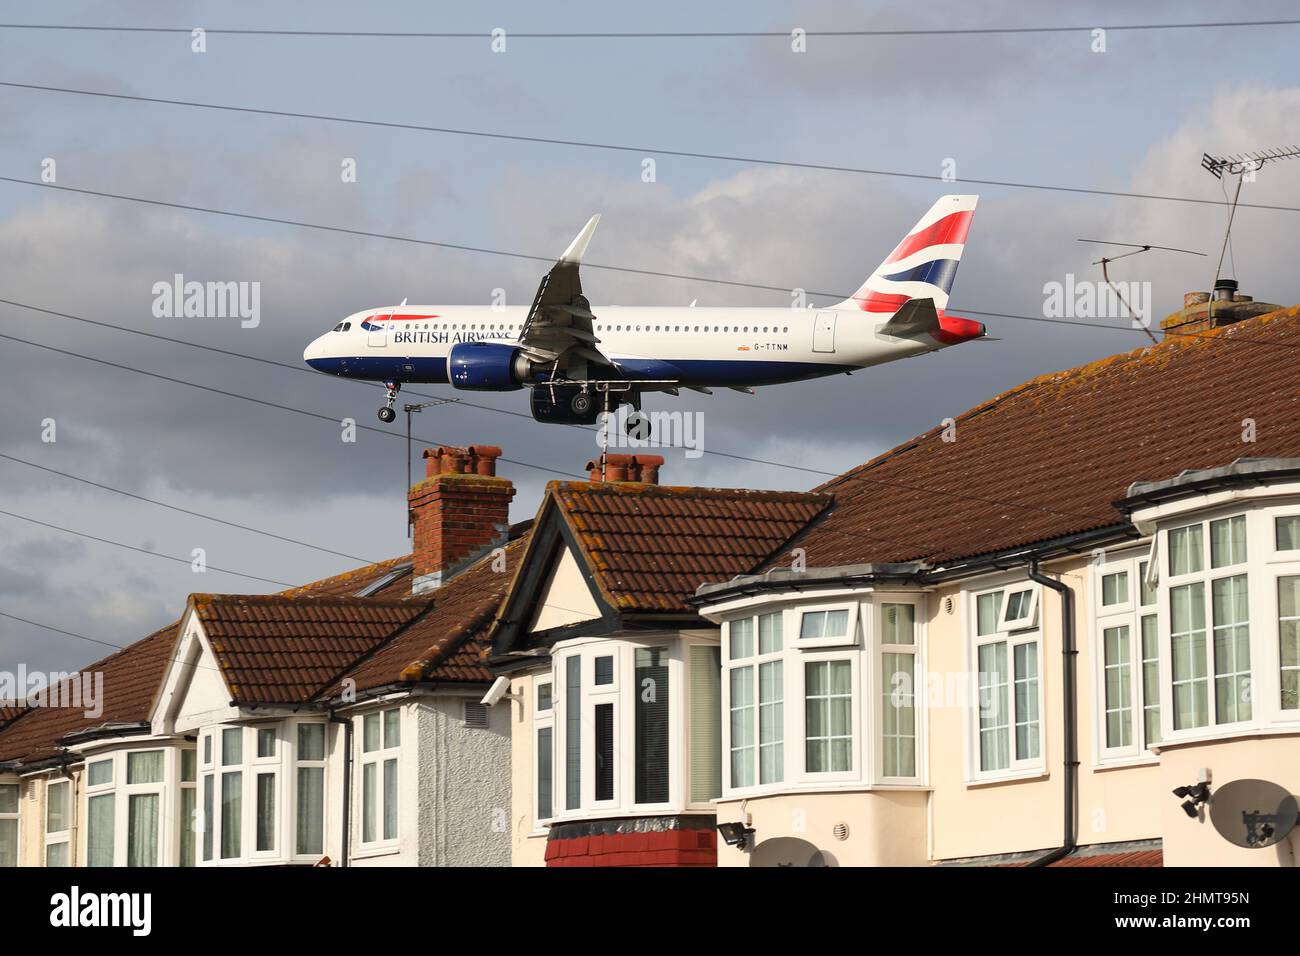 An British Airways Airbus A320neo G-TTNM approaches Heathrow Airport flying low over rooftops of houses in Myrtle Avenue, London, UK Stock Photo